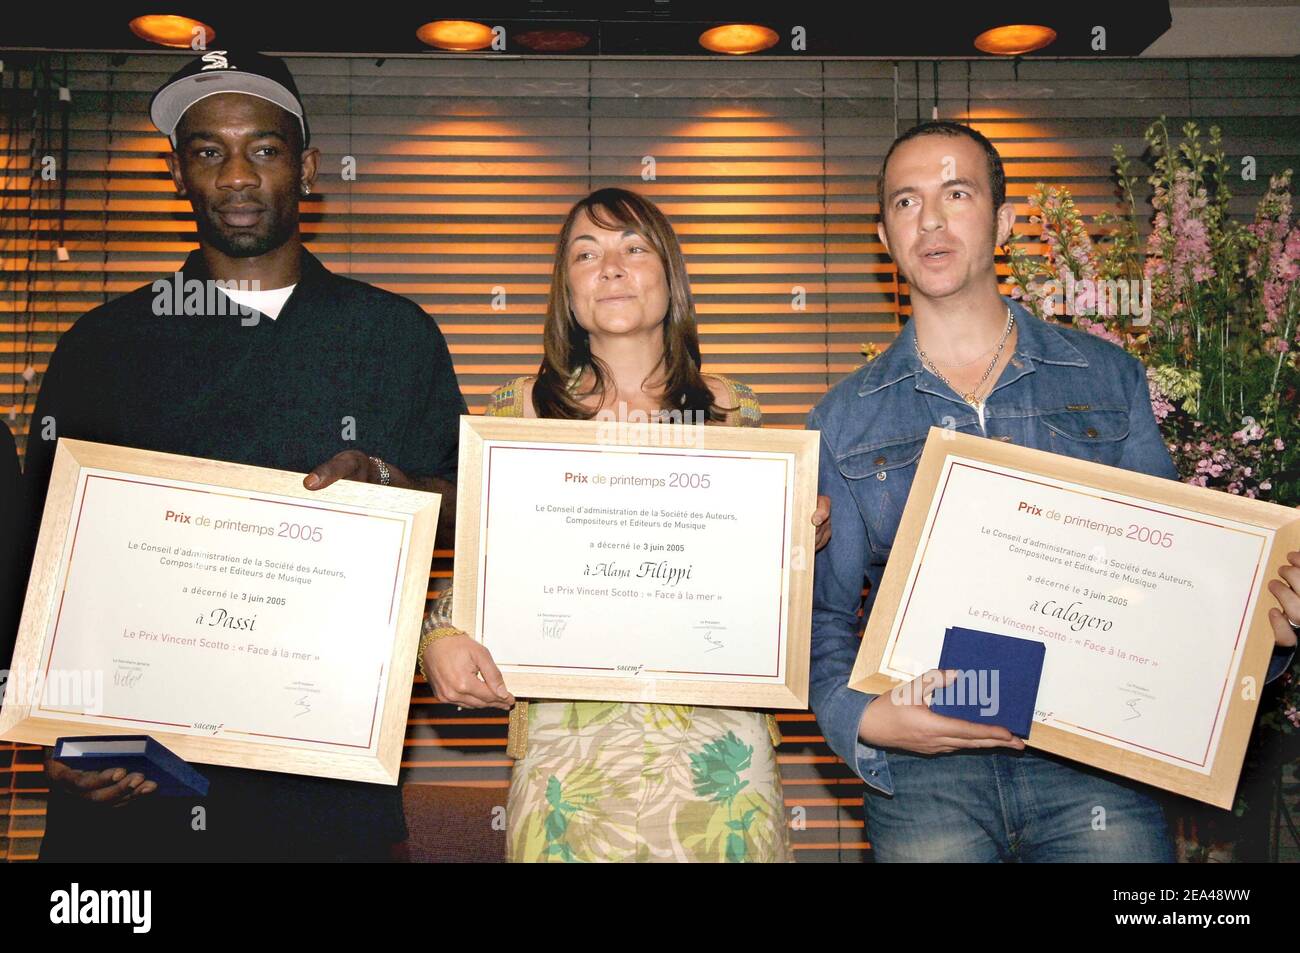 Singers and mucisians Passi, Alana Filippi and Calogero receive the Prix de Printemps 2005 of the Sacem during a ceremony held at the Sacem headquarters in Boulogne-Billancourt on June 3, 2005. Photo by Bruno Klein/ABACA. Stock Photo